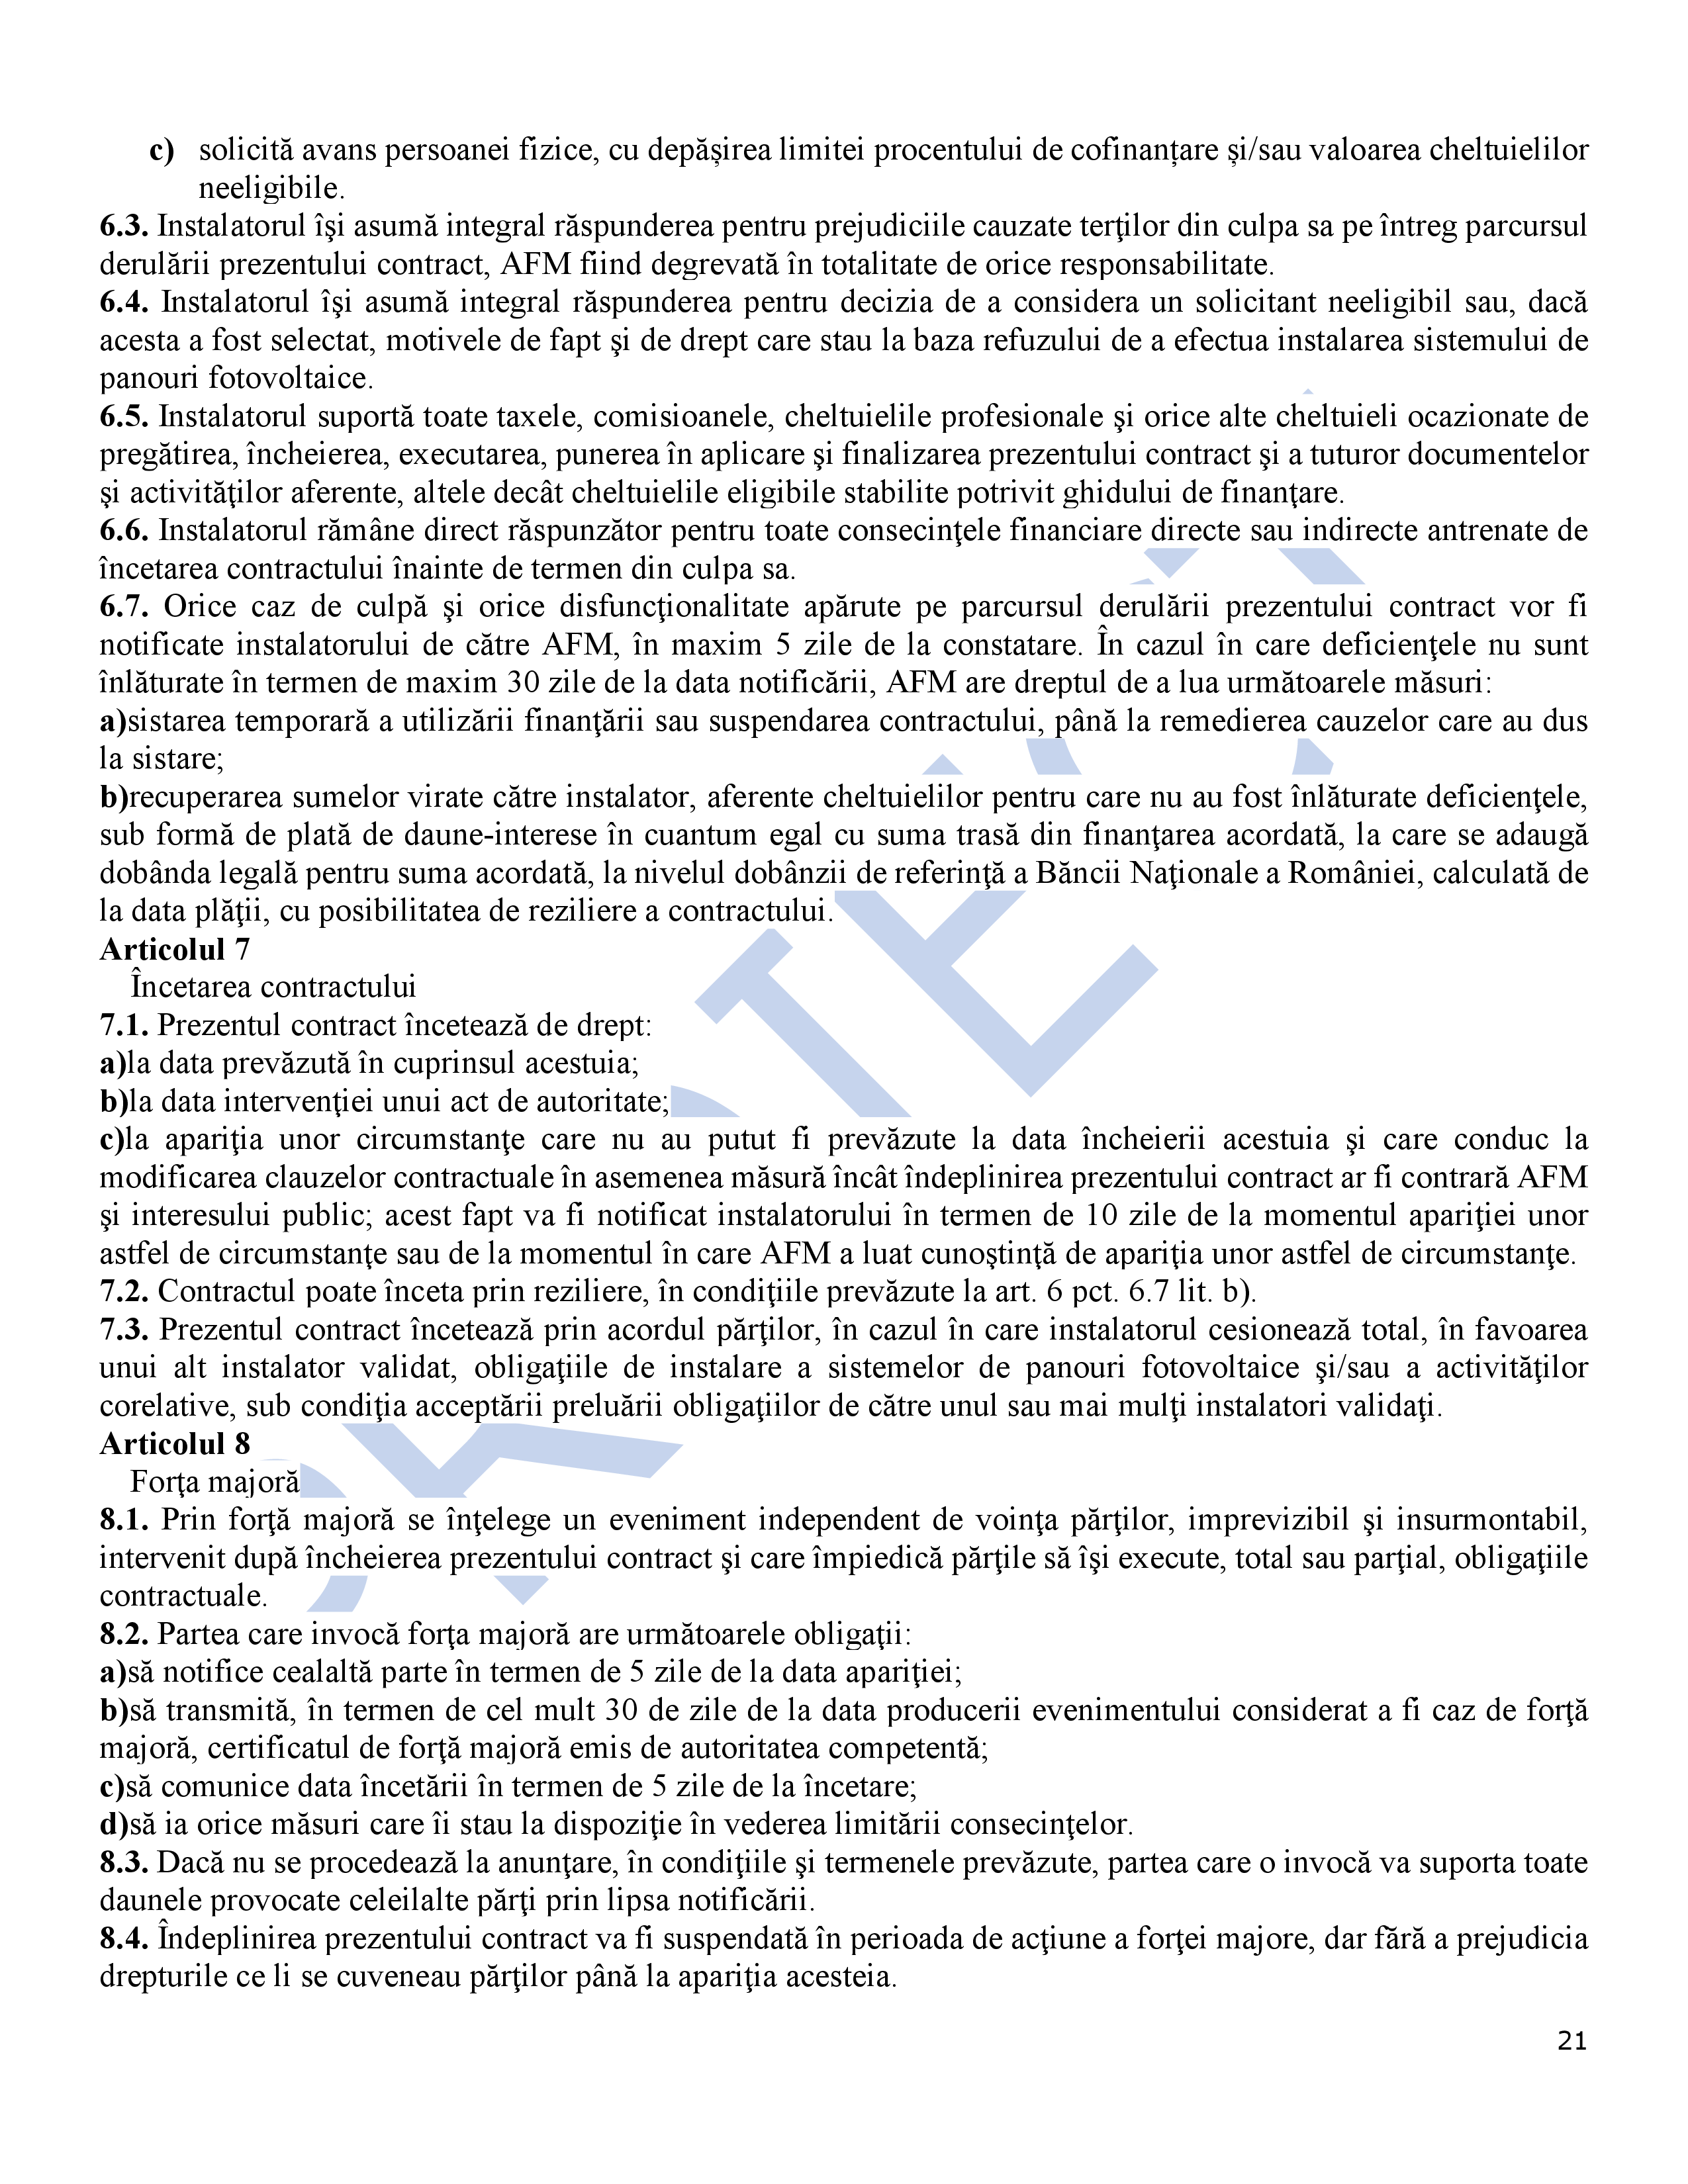 Pagina 21 - ghid_fotovoltaice_2023 